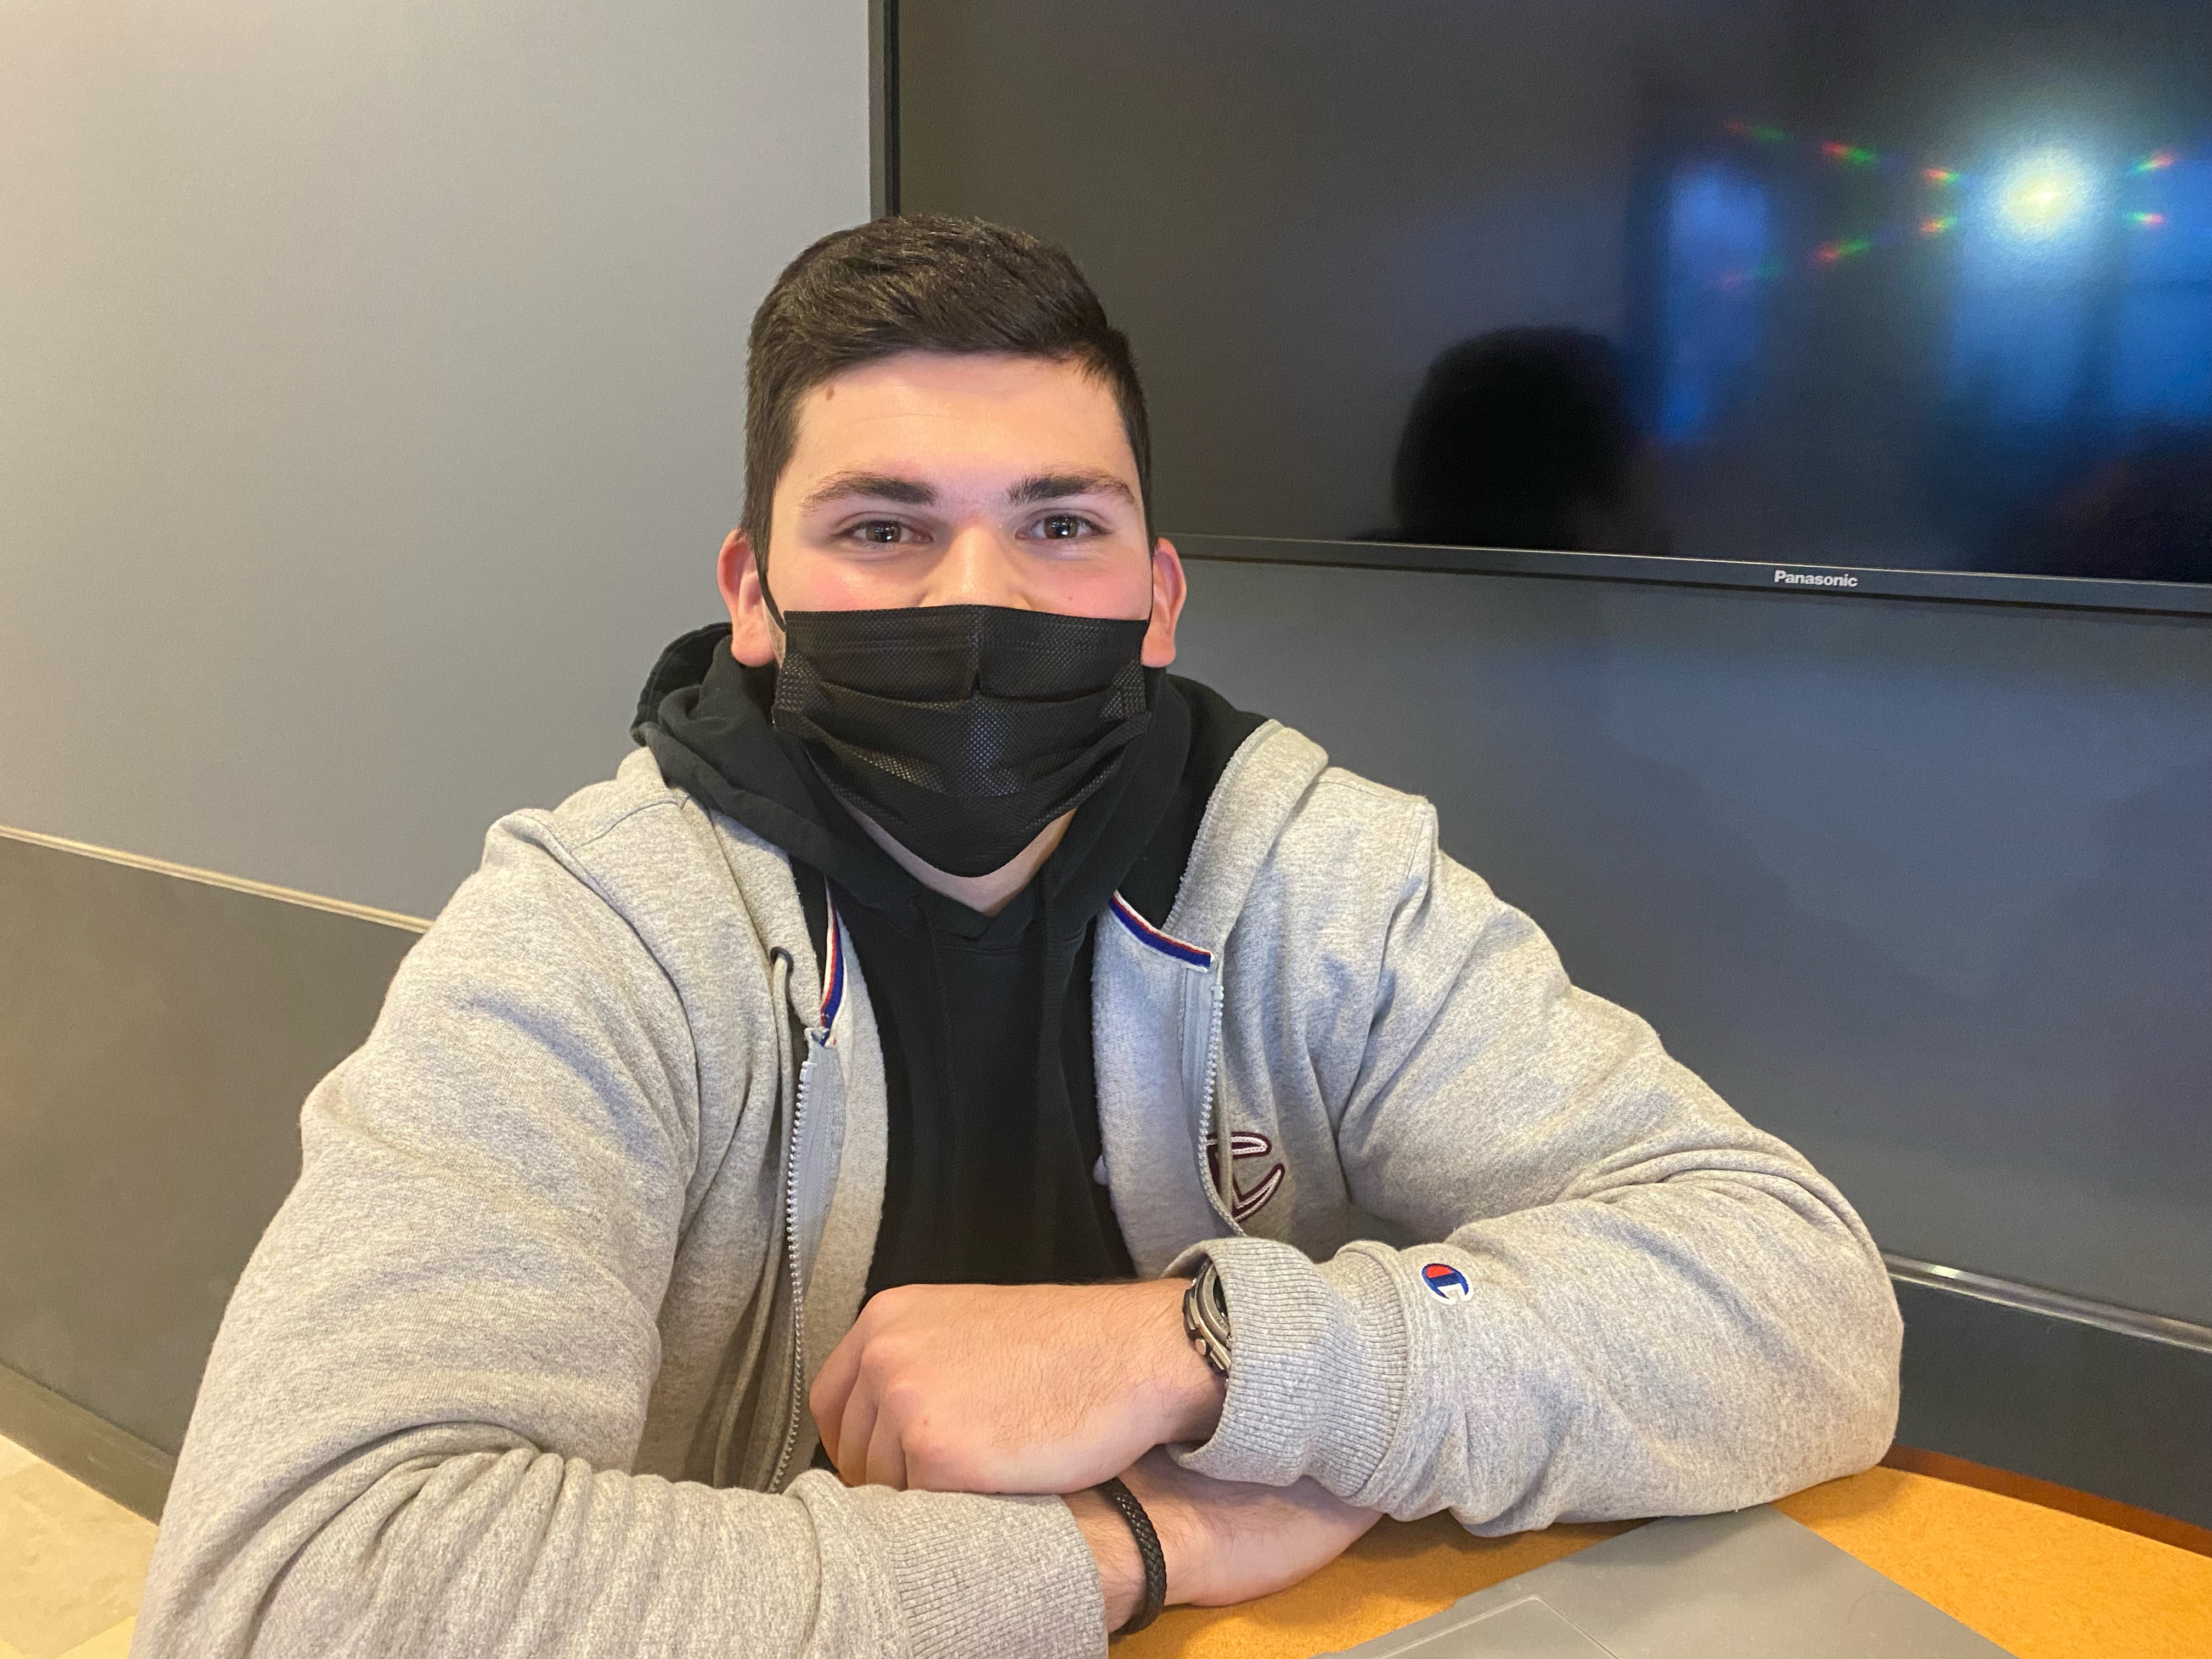 Dylan D’Ambrosio, a senior physical education major, believes the university should not have charged for winter housing last year. Sam Nungesser | The Montclarion